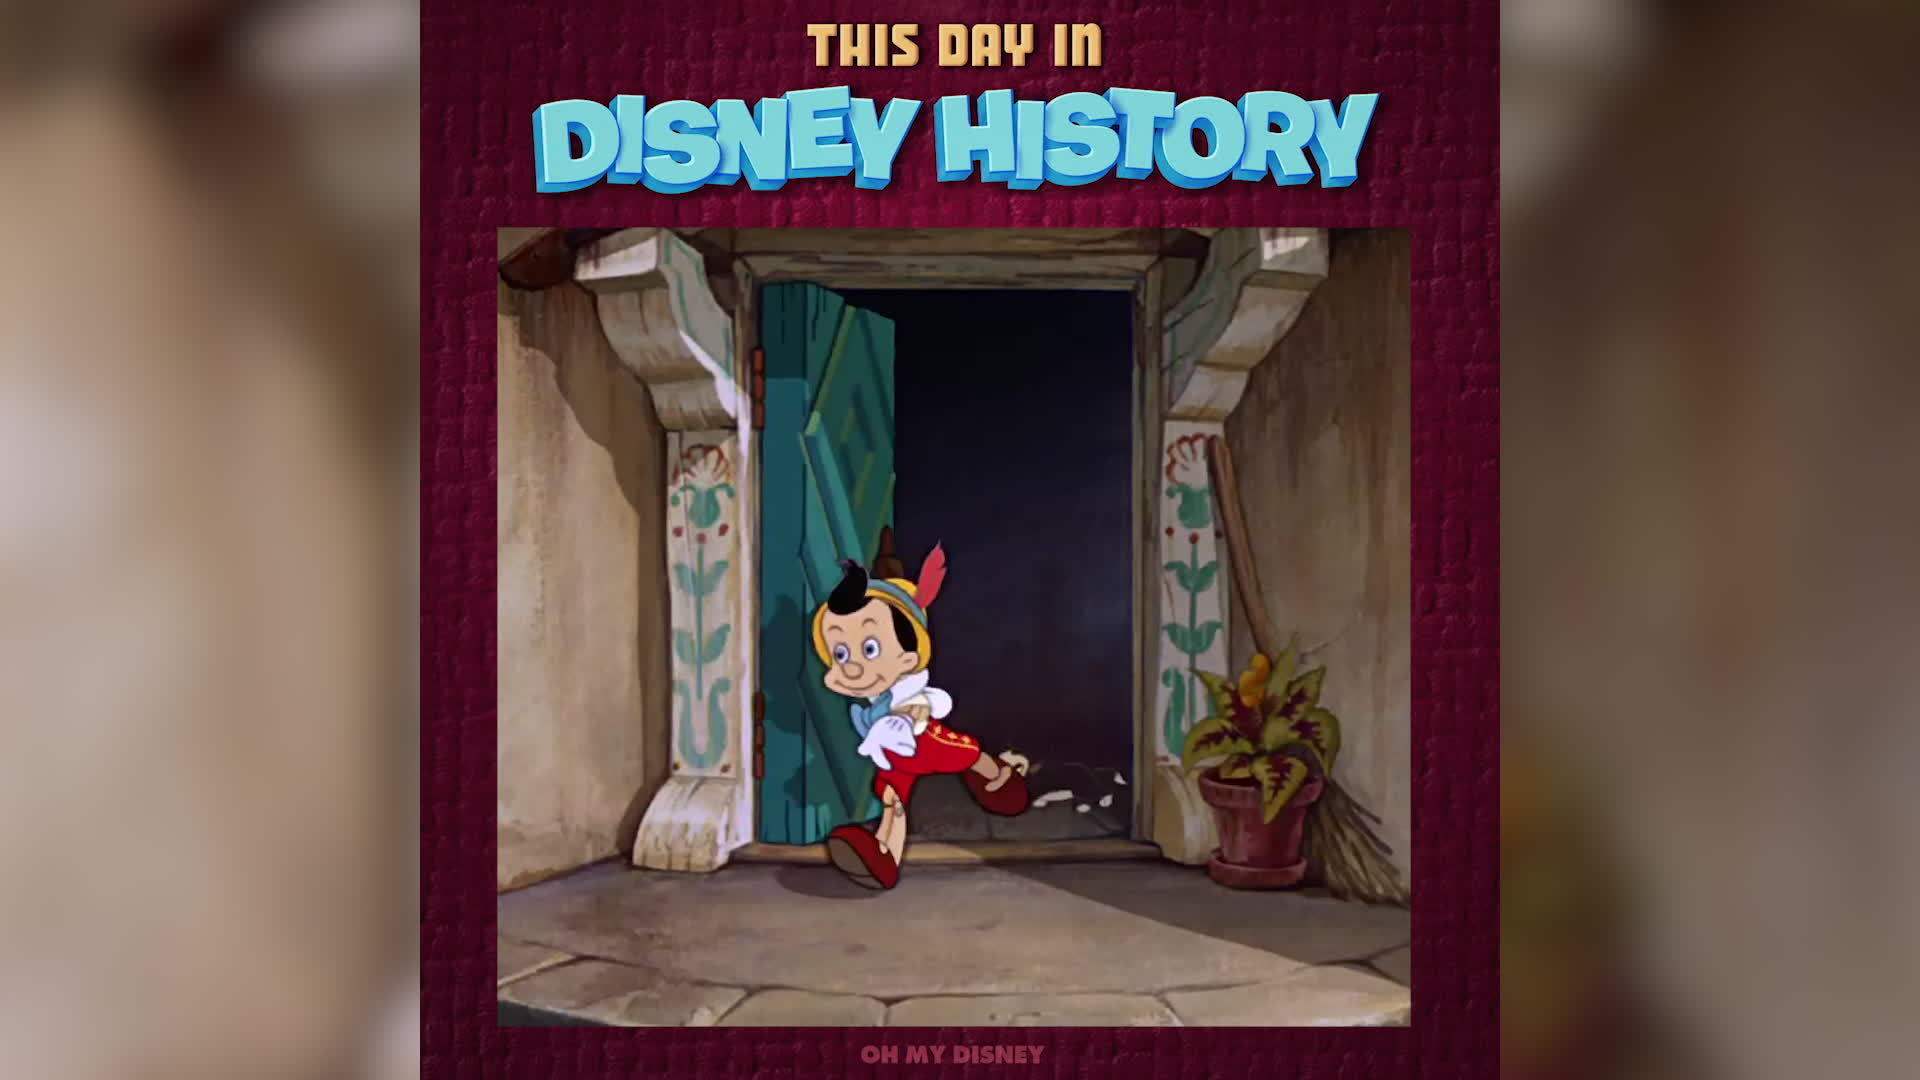 Pinocchio | This Day in Disney History by Oh My Disney